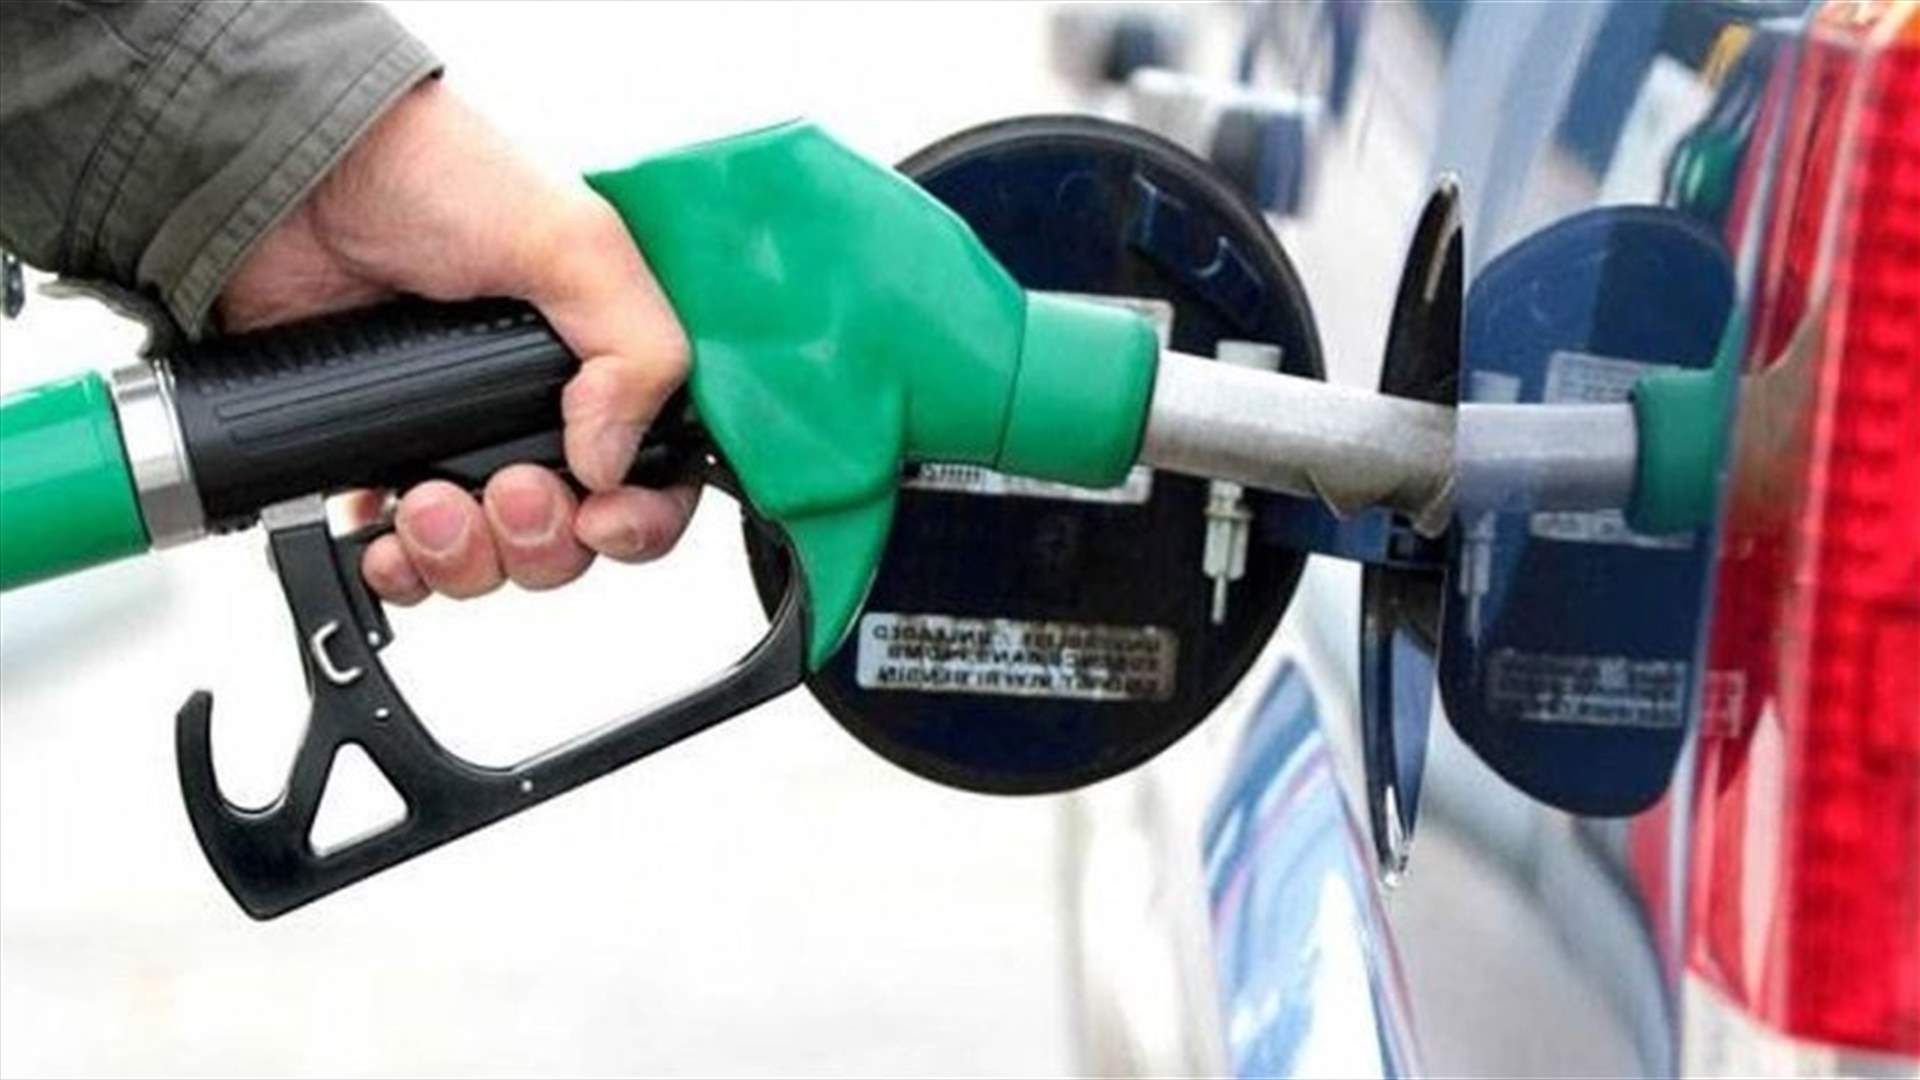 Prices of gasoline see significant increase